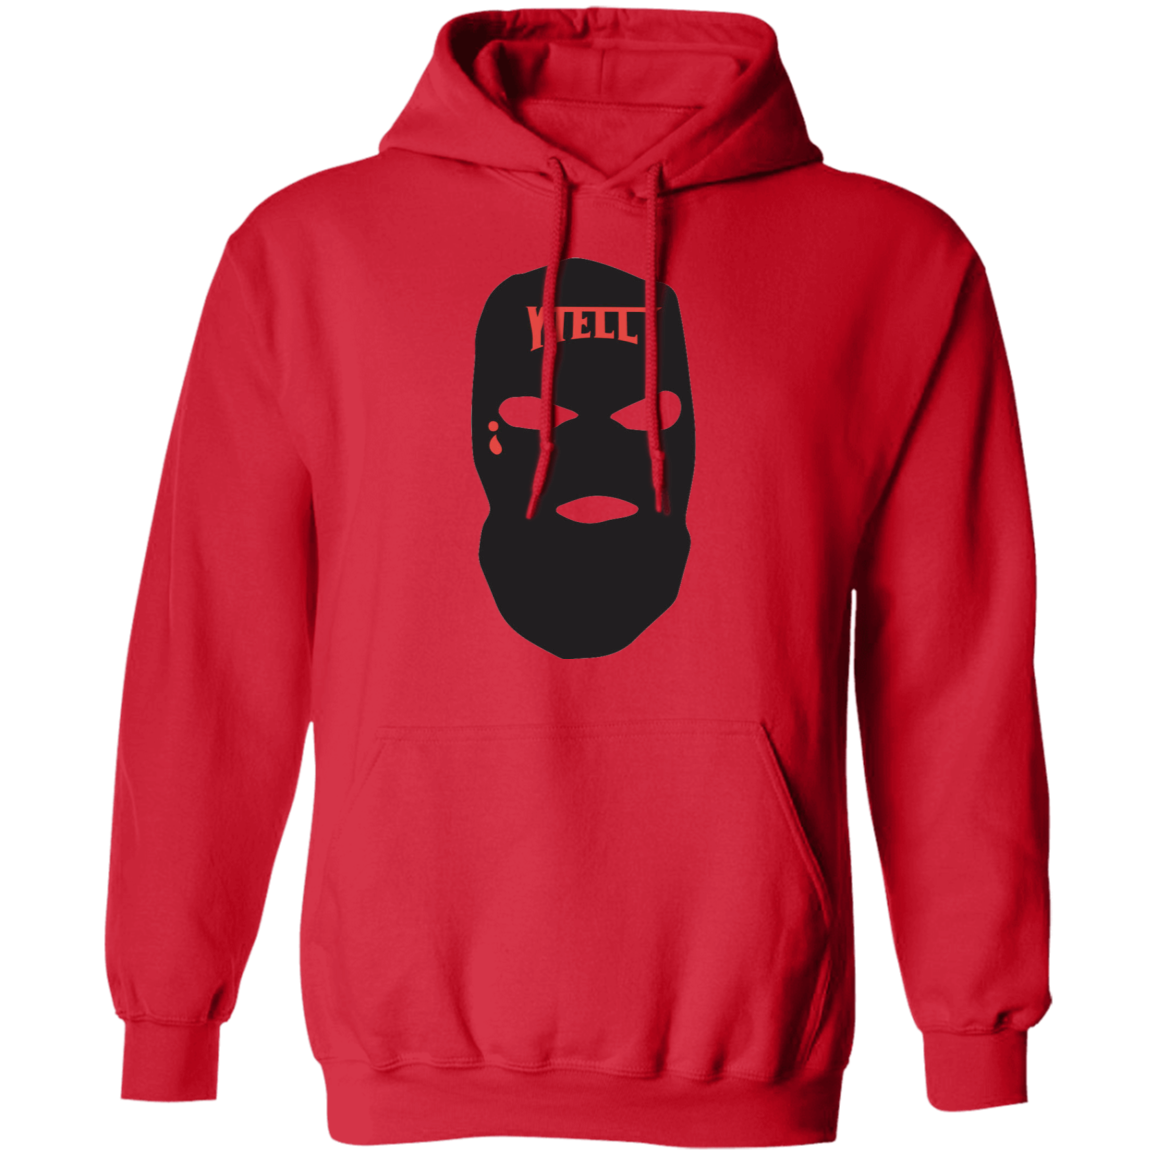 YTell Red Hoodie Face mask  Logo